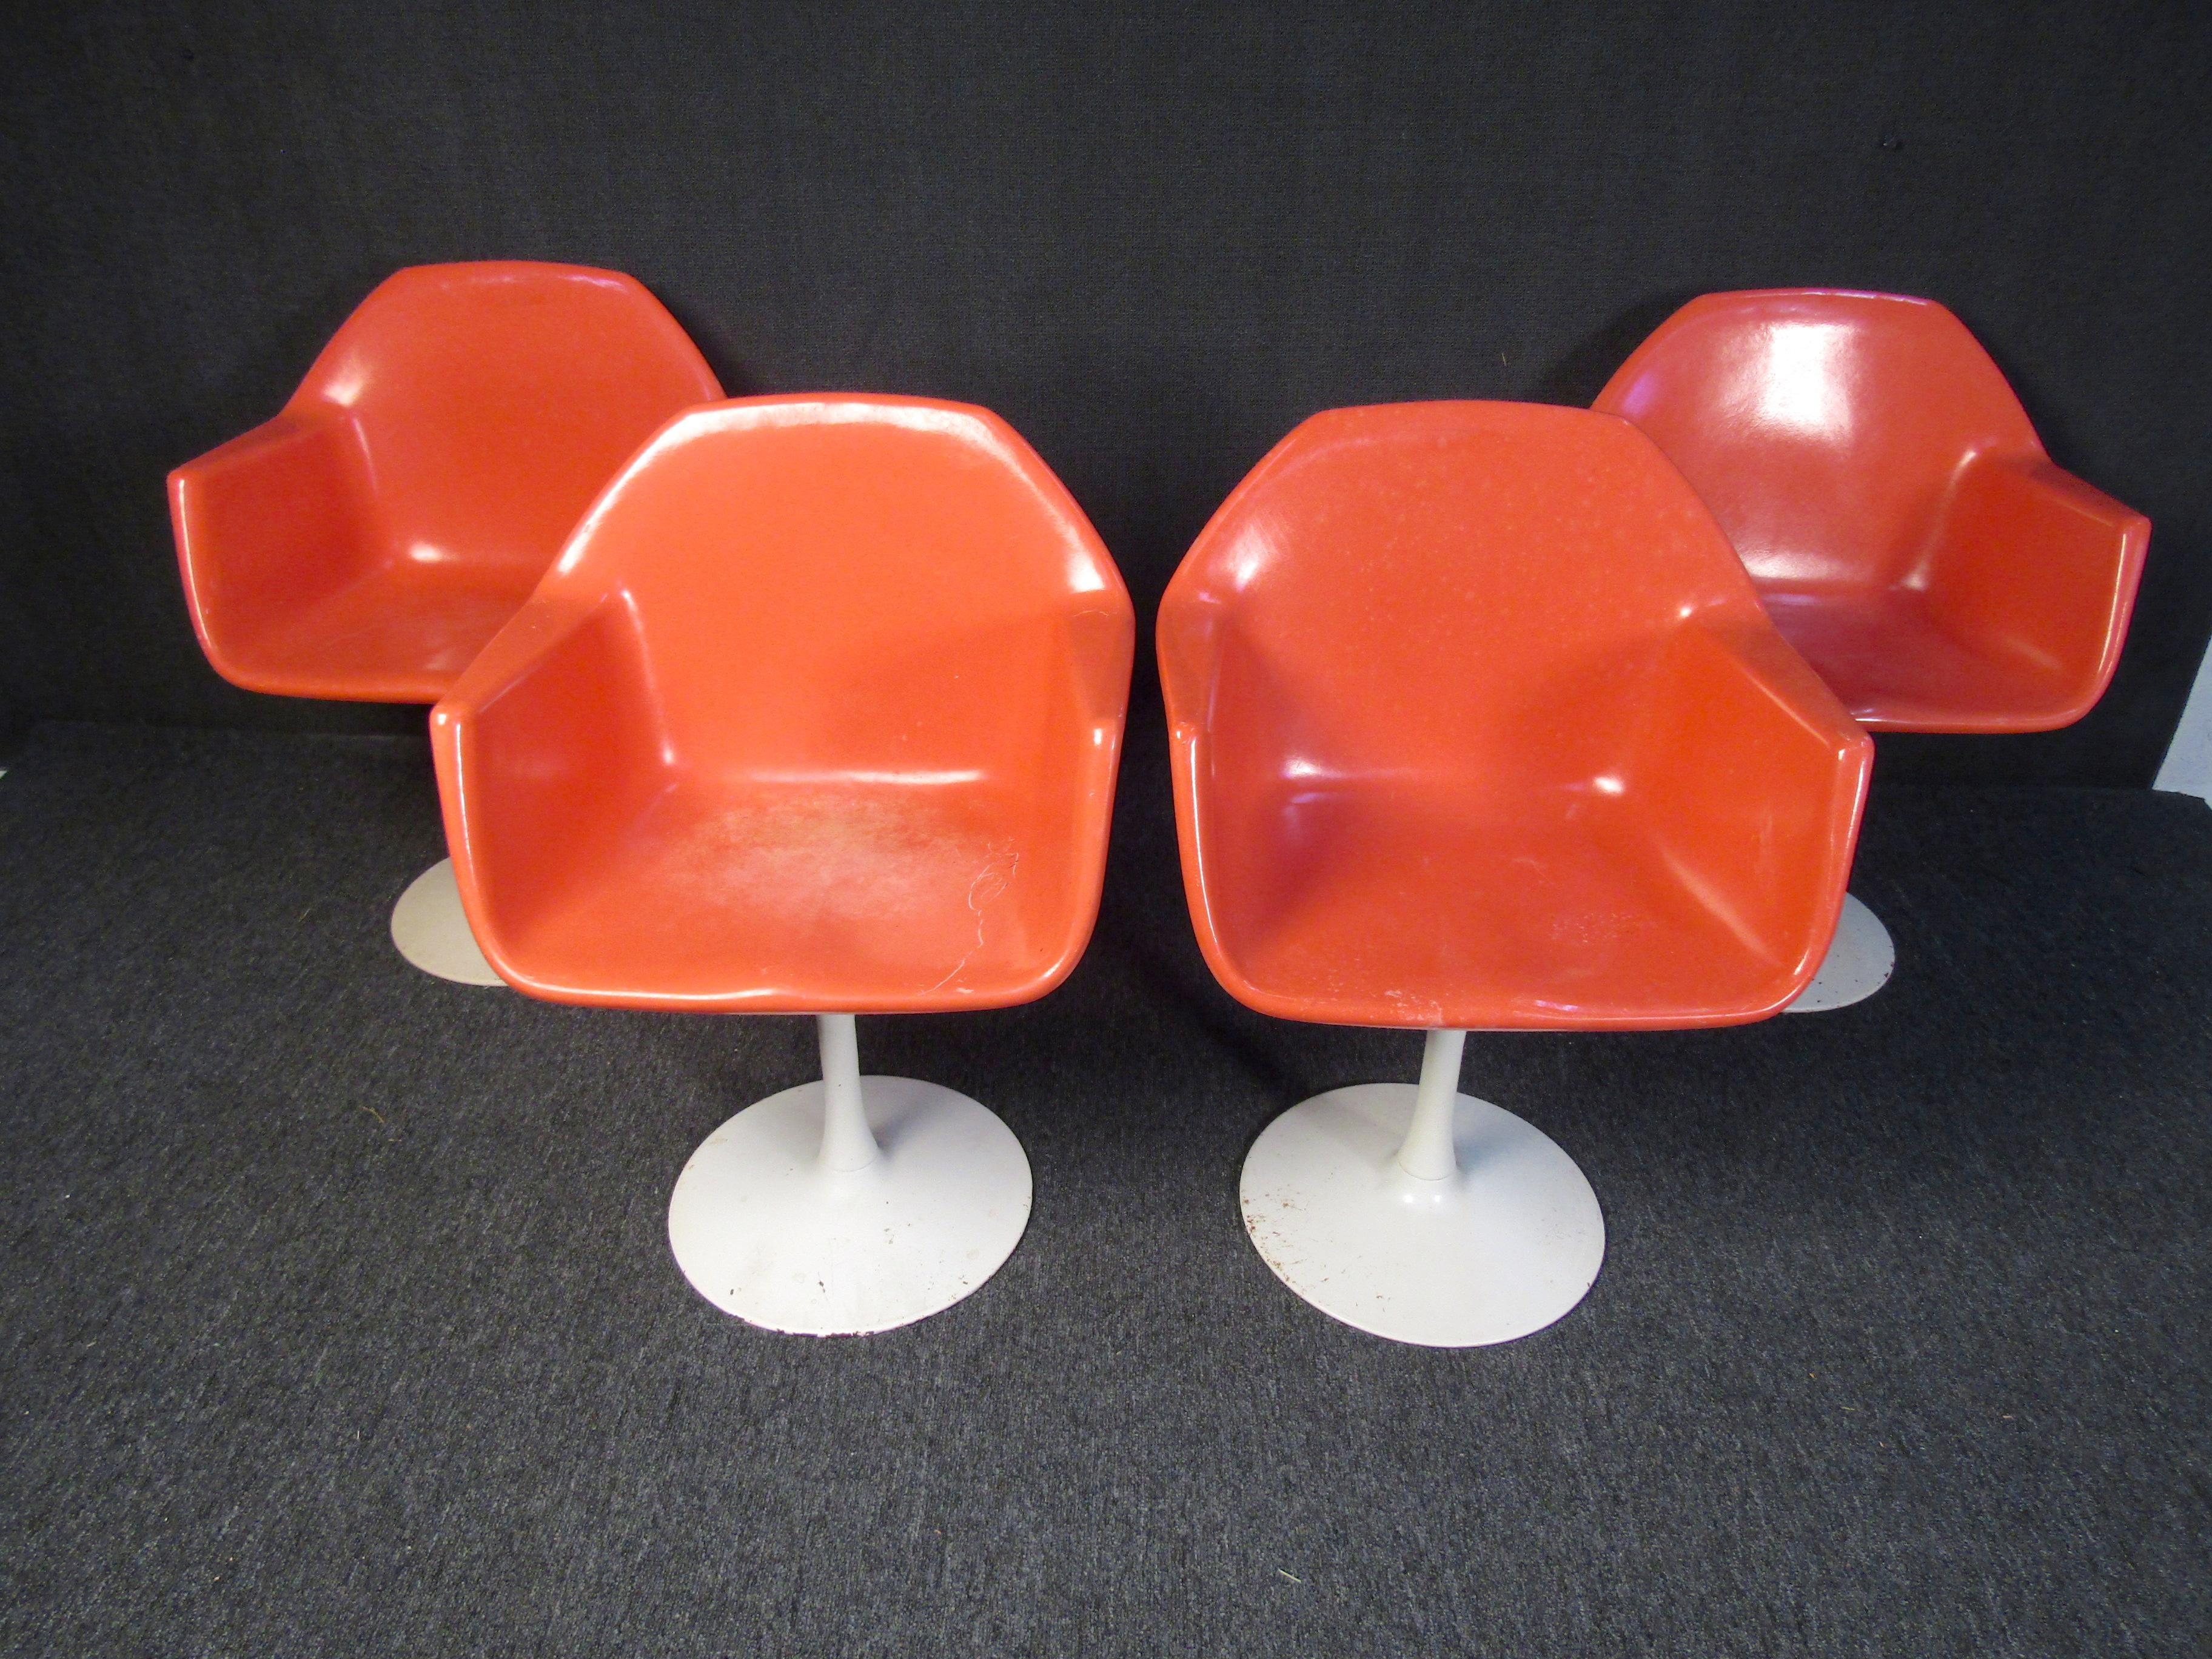 A set of four tulip chairs that pop with Mid-Century Modern style and a bright peach color. A comfortable design sits upon white pedestal bases, making these chairs a unique and stylish addition to any setting. Please confirm item location with